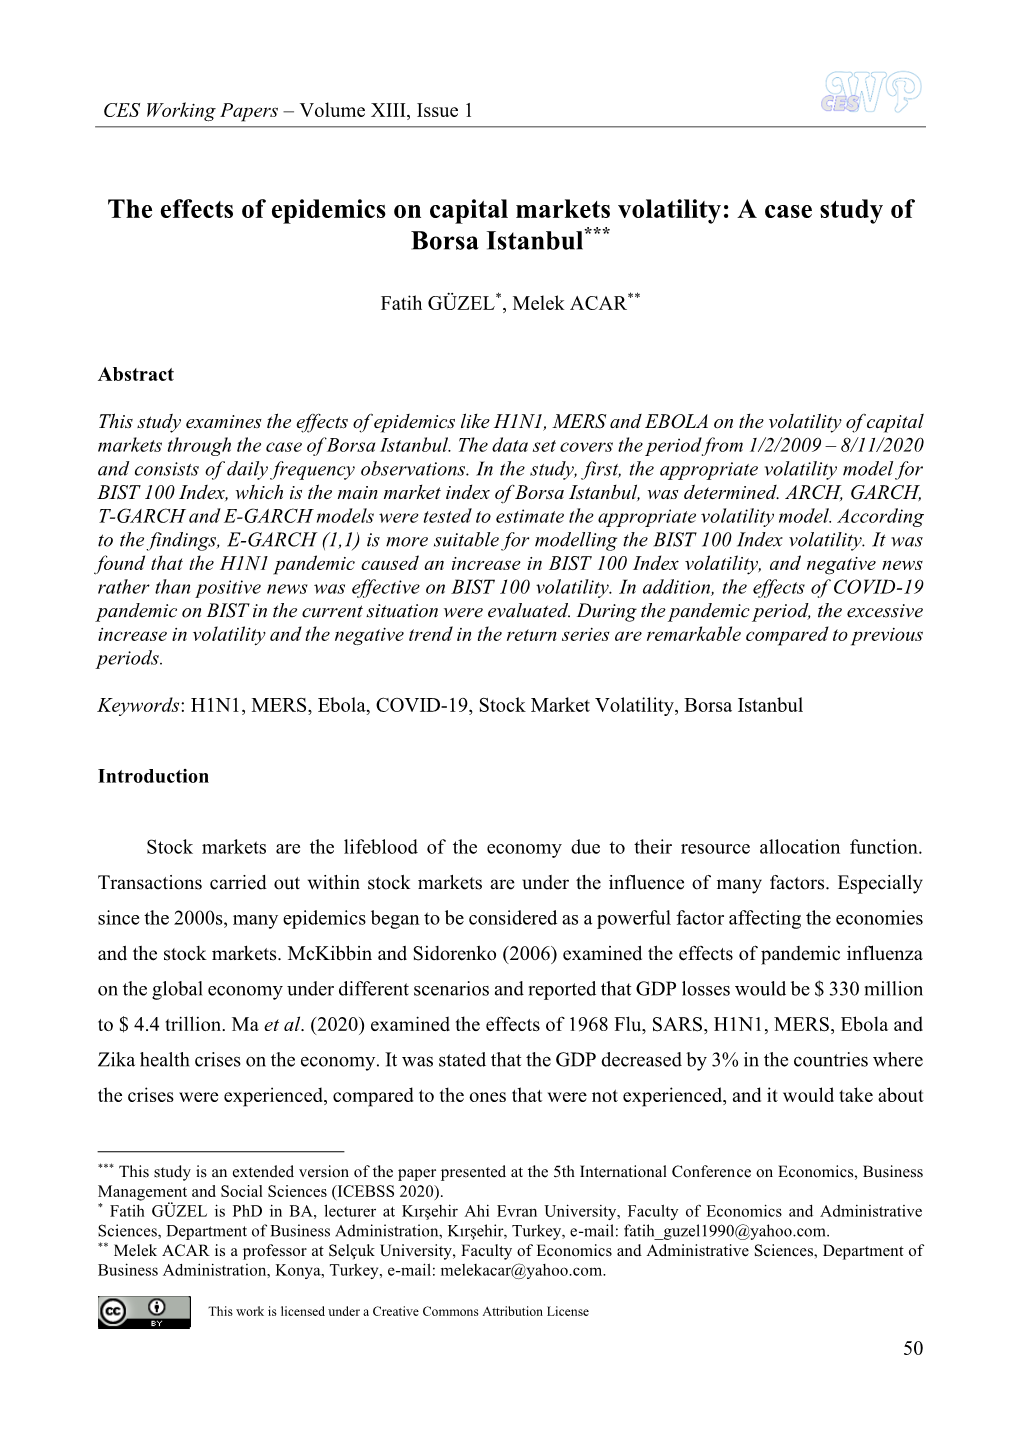 The Effects of Epidemics on Capital Markets Volatility: a Case Study of Borsa Istanbul***